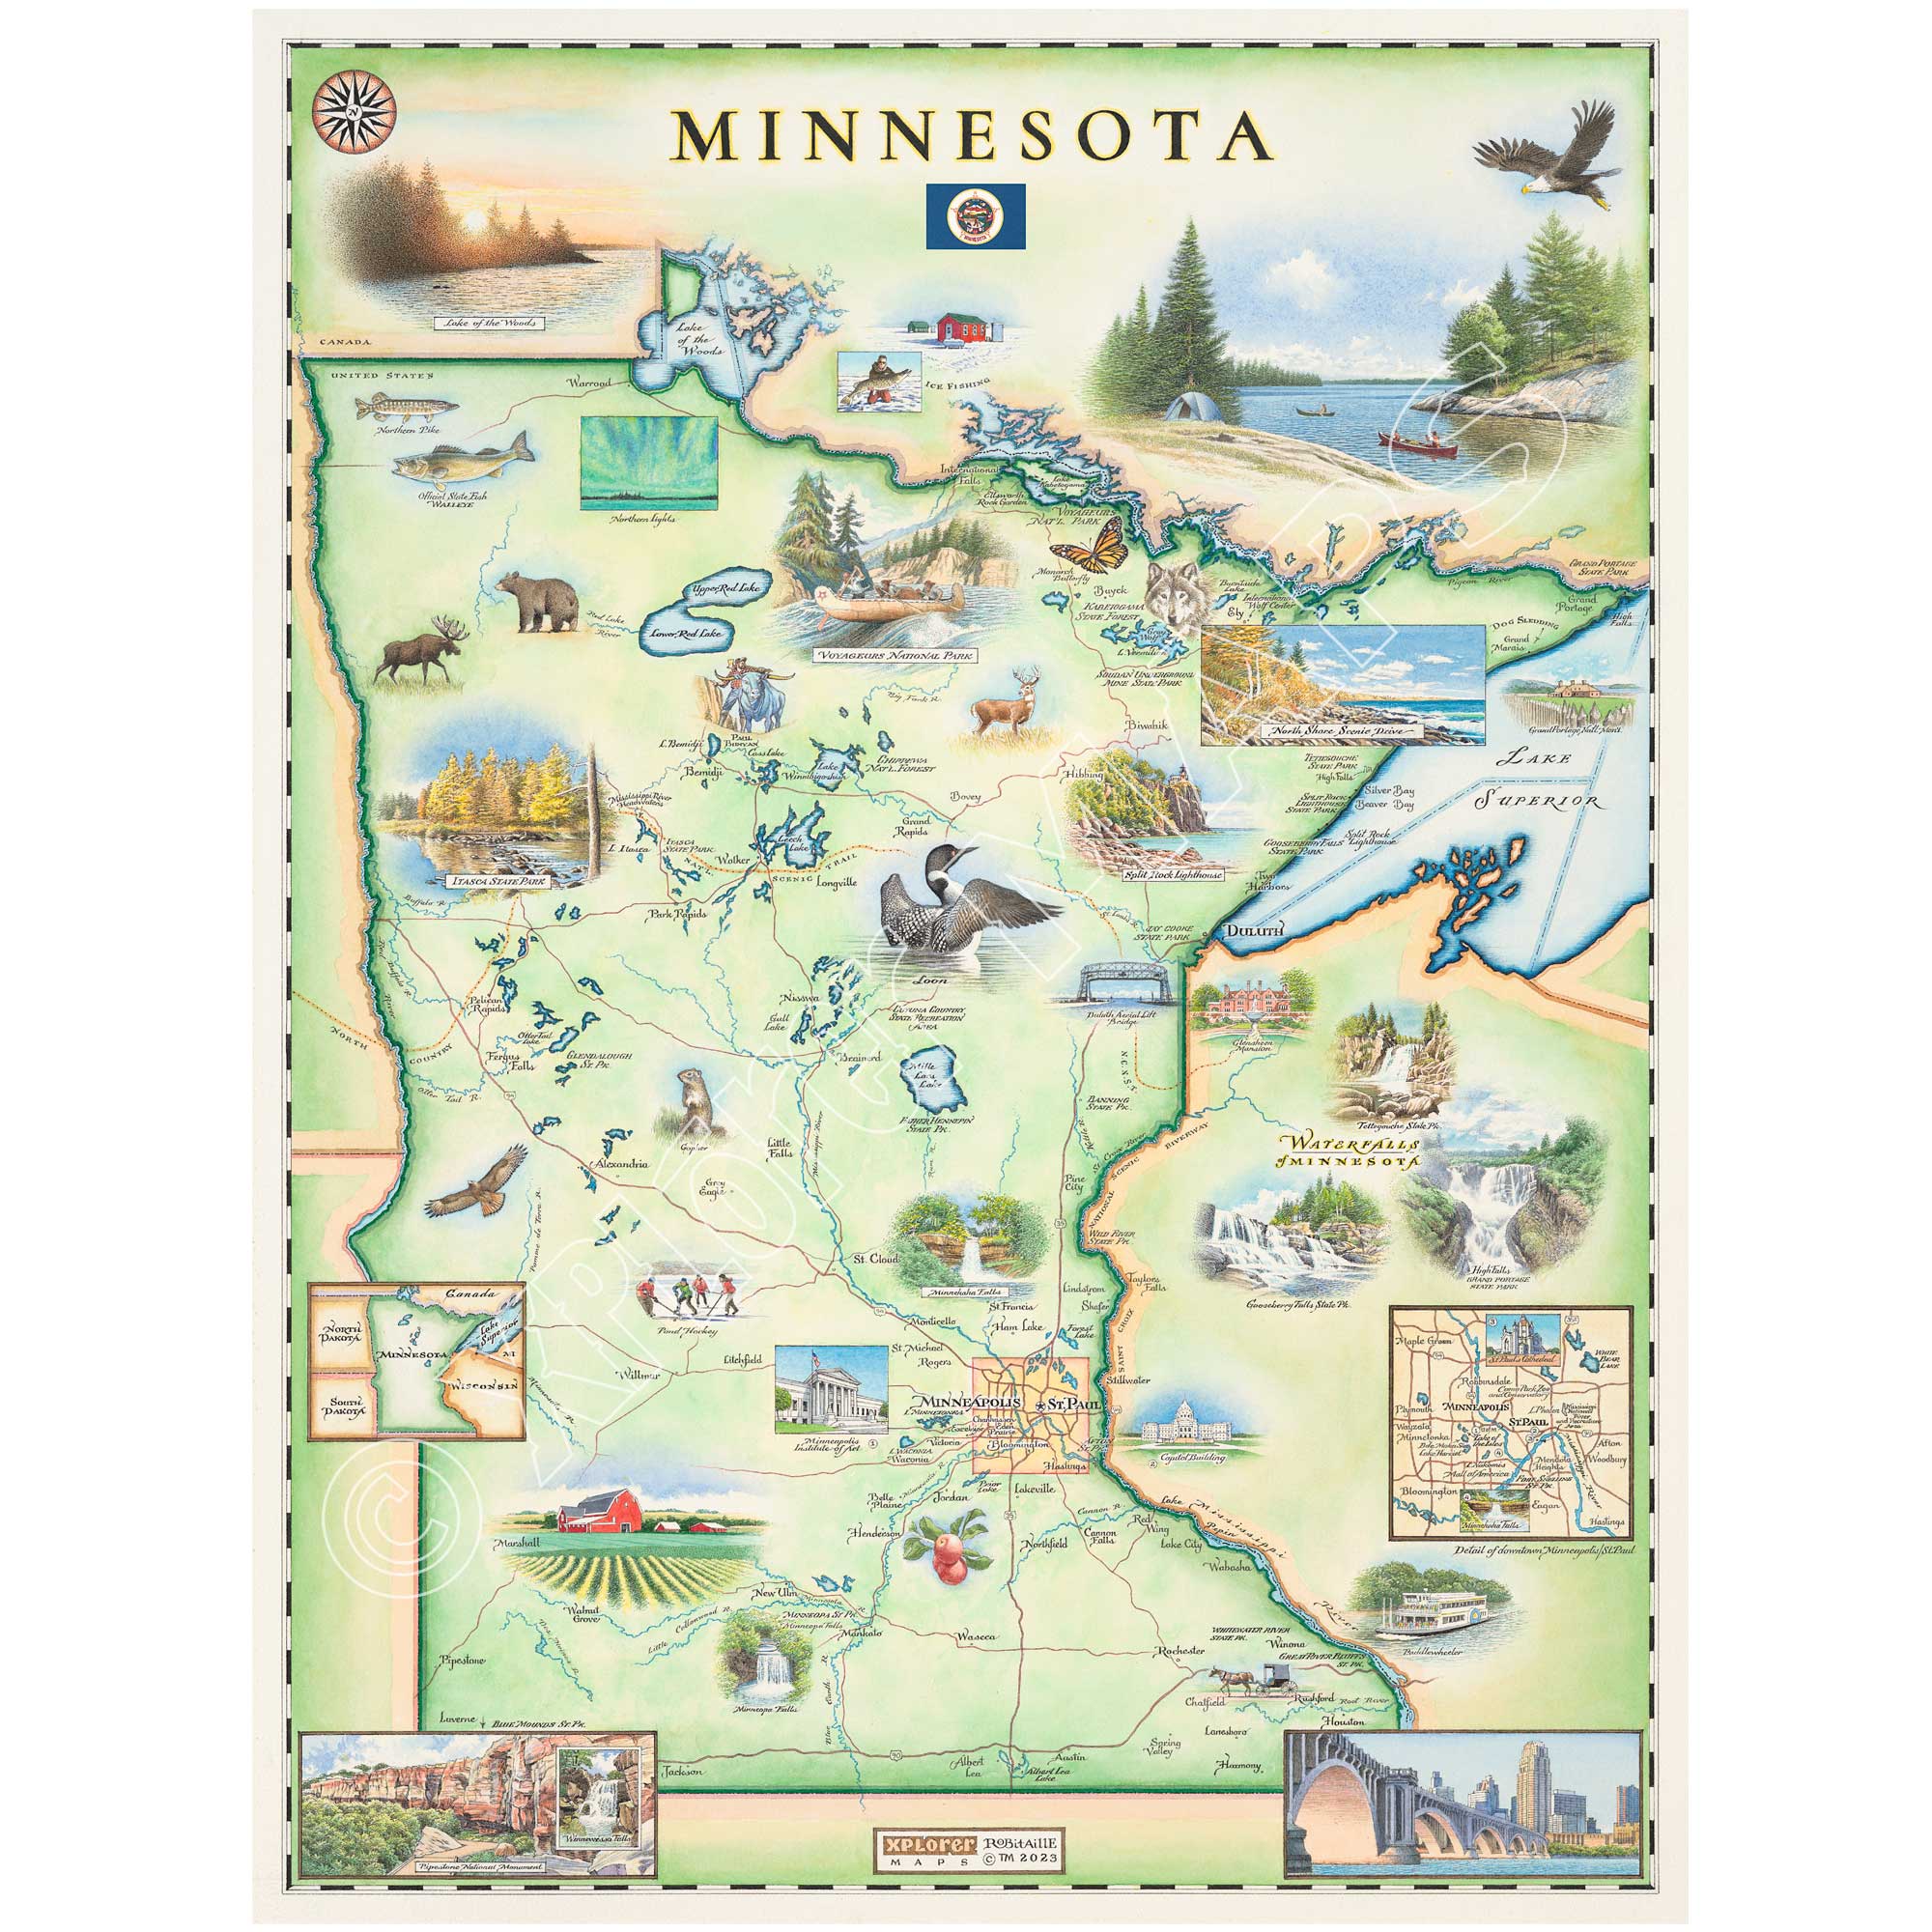 Hand-drawn Minnesota State Map in earth-tone colors of greens, blues, and tans.. This 18x24